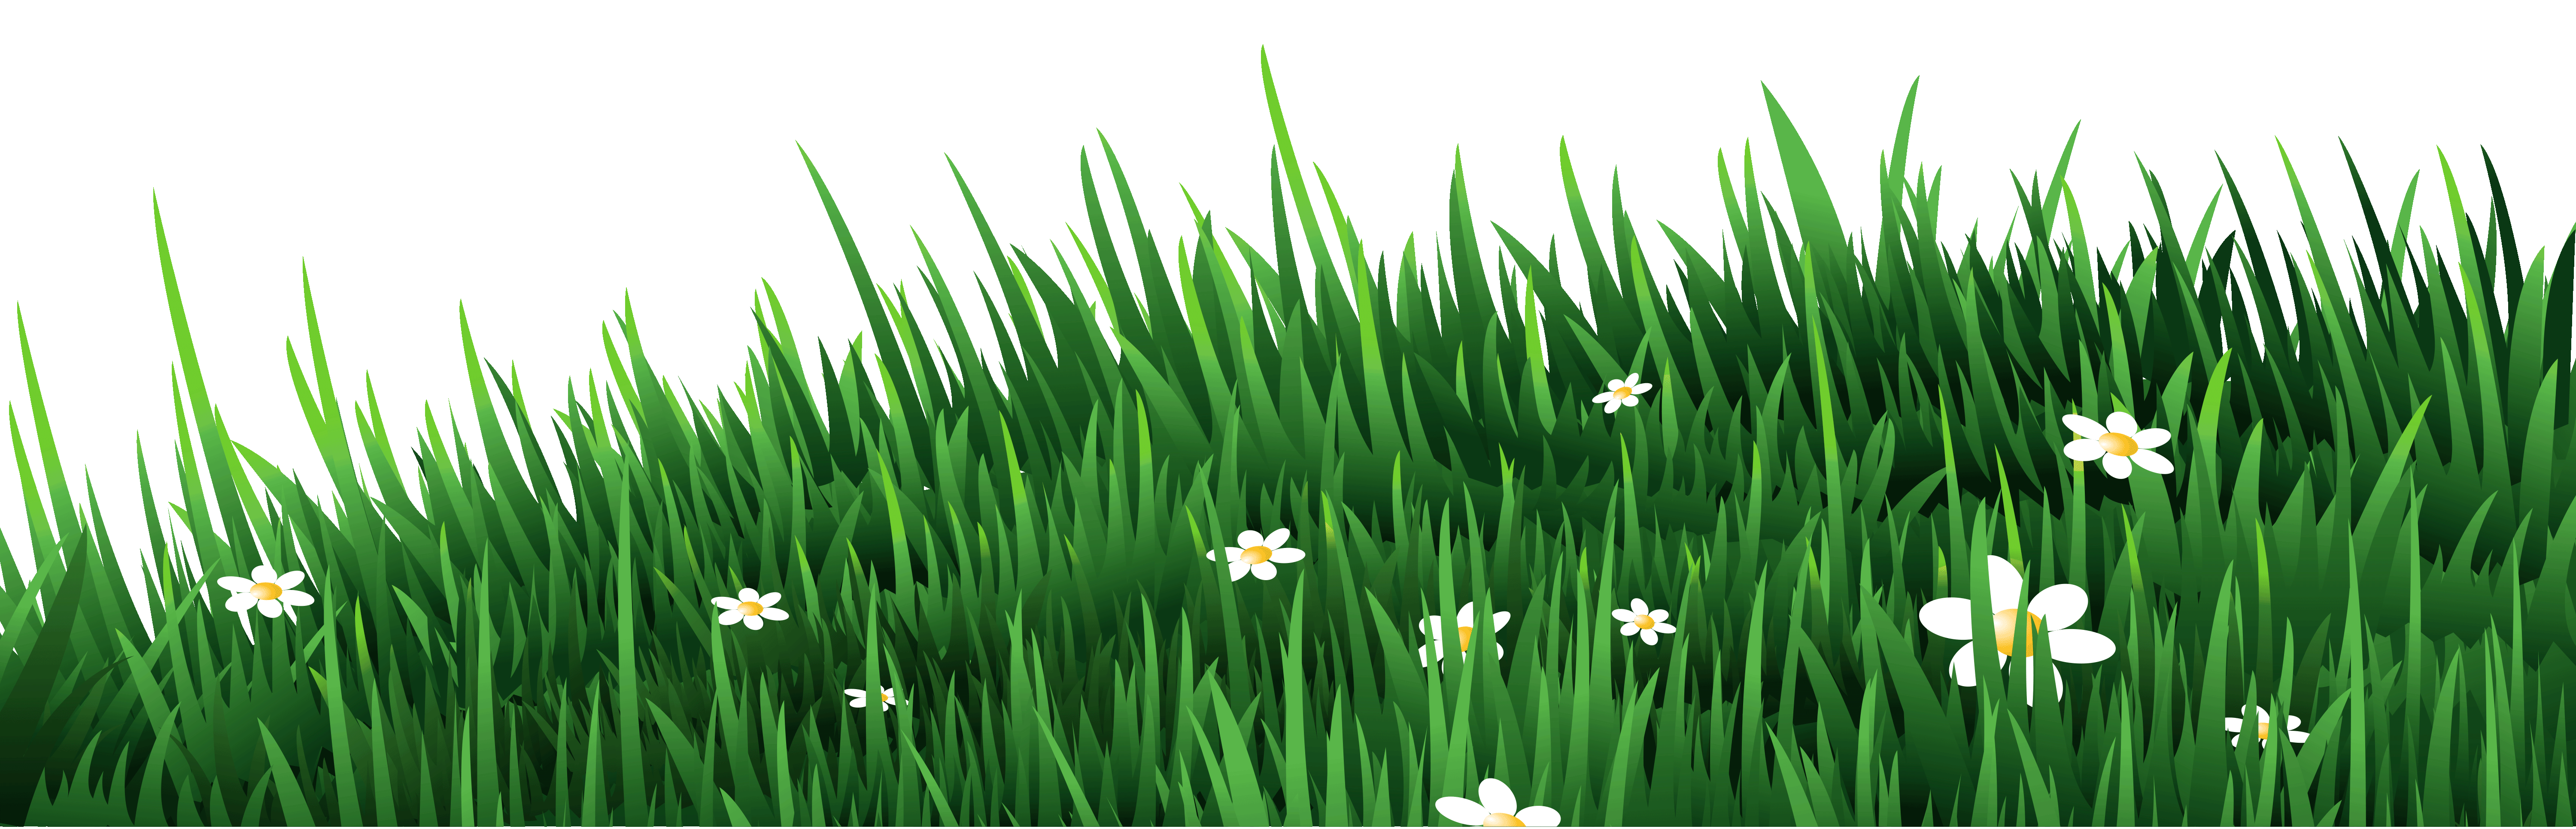 Transparent with white daisies. Grass clipart rock